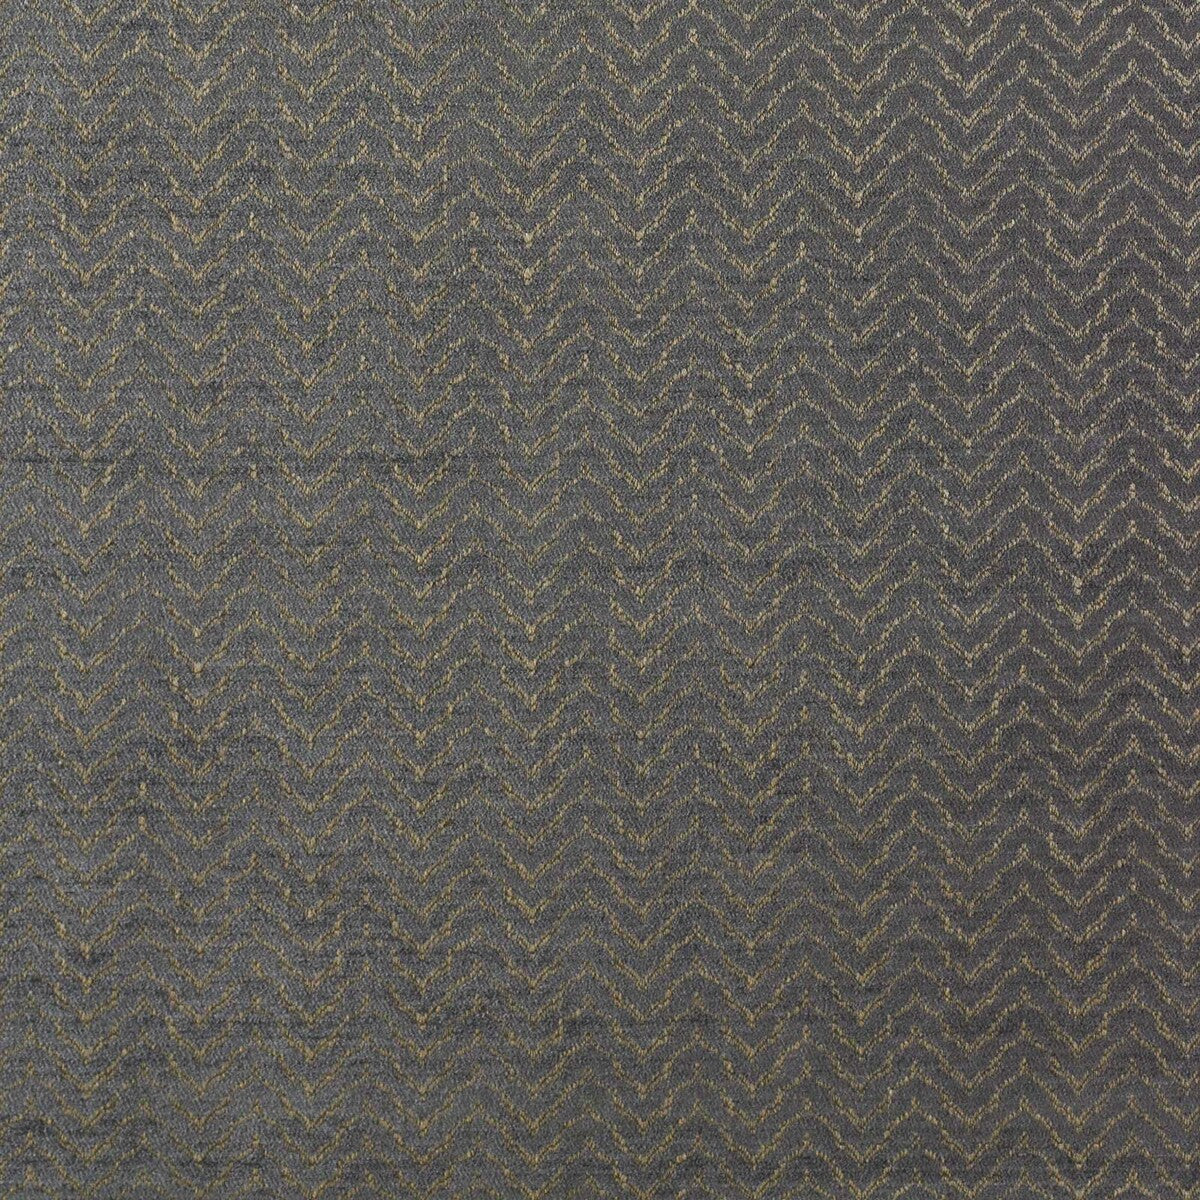 Sella fabric in gris color - pattern GDT5180.010.0 - by Gaston y Daniela in the Lorenzo Castillo II collection